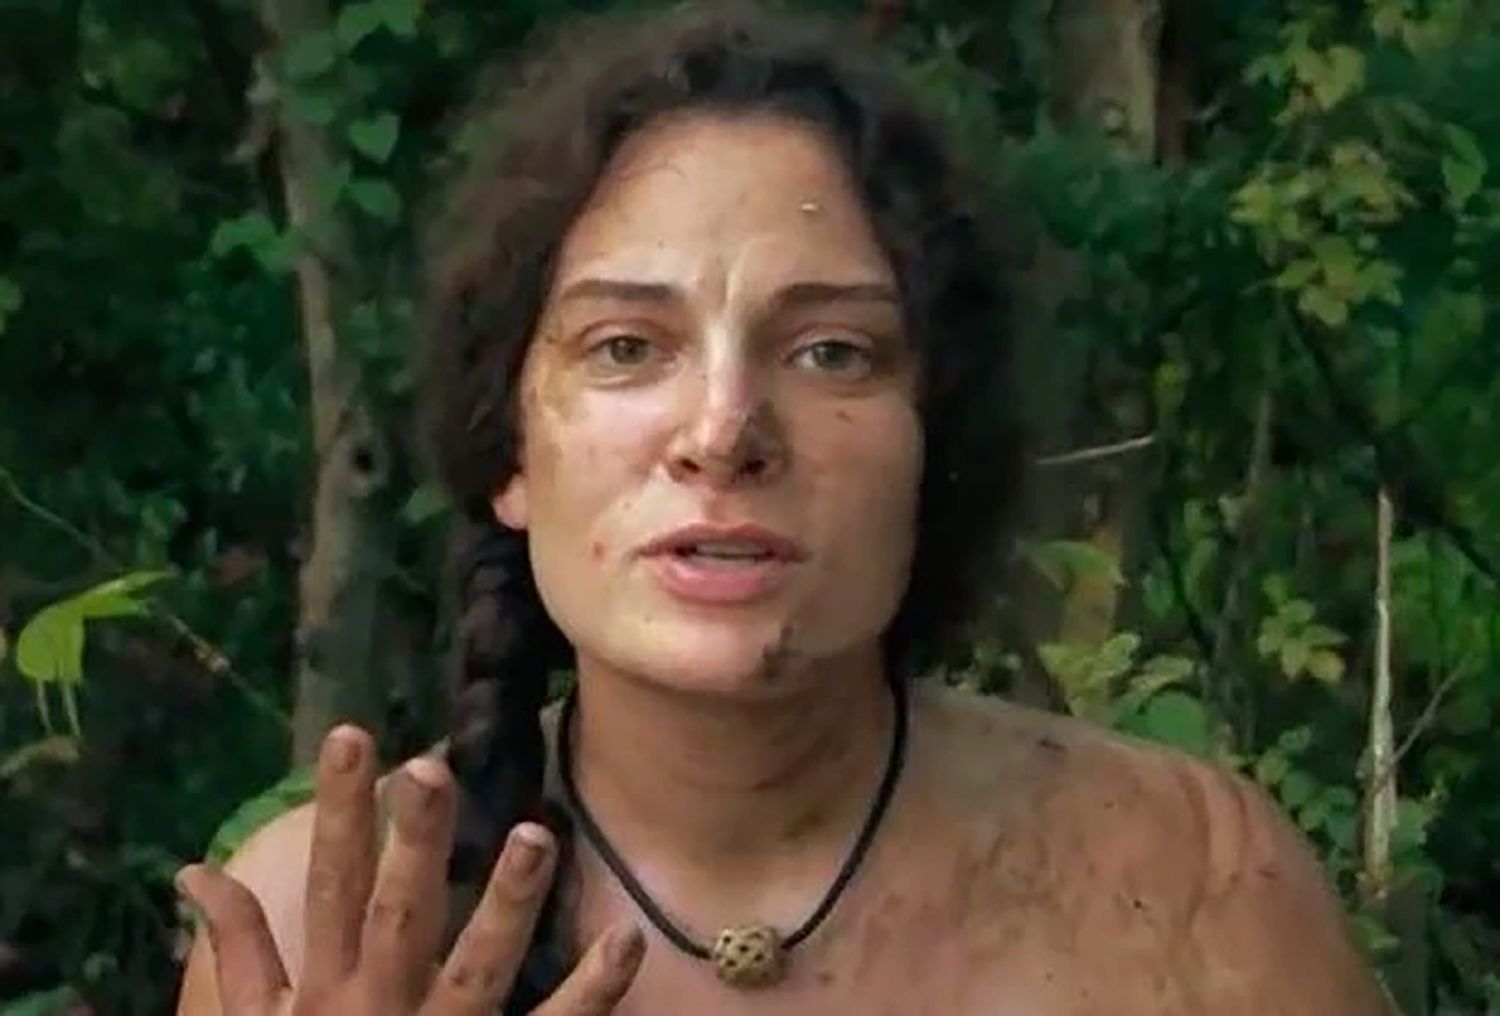 Melanie Rauscher, contestant on Naked and Afraid, dies at 35